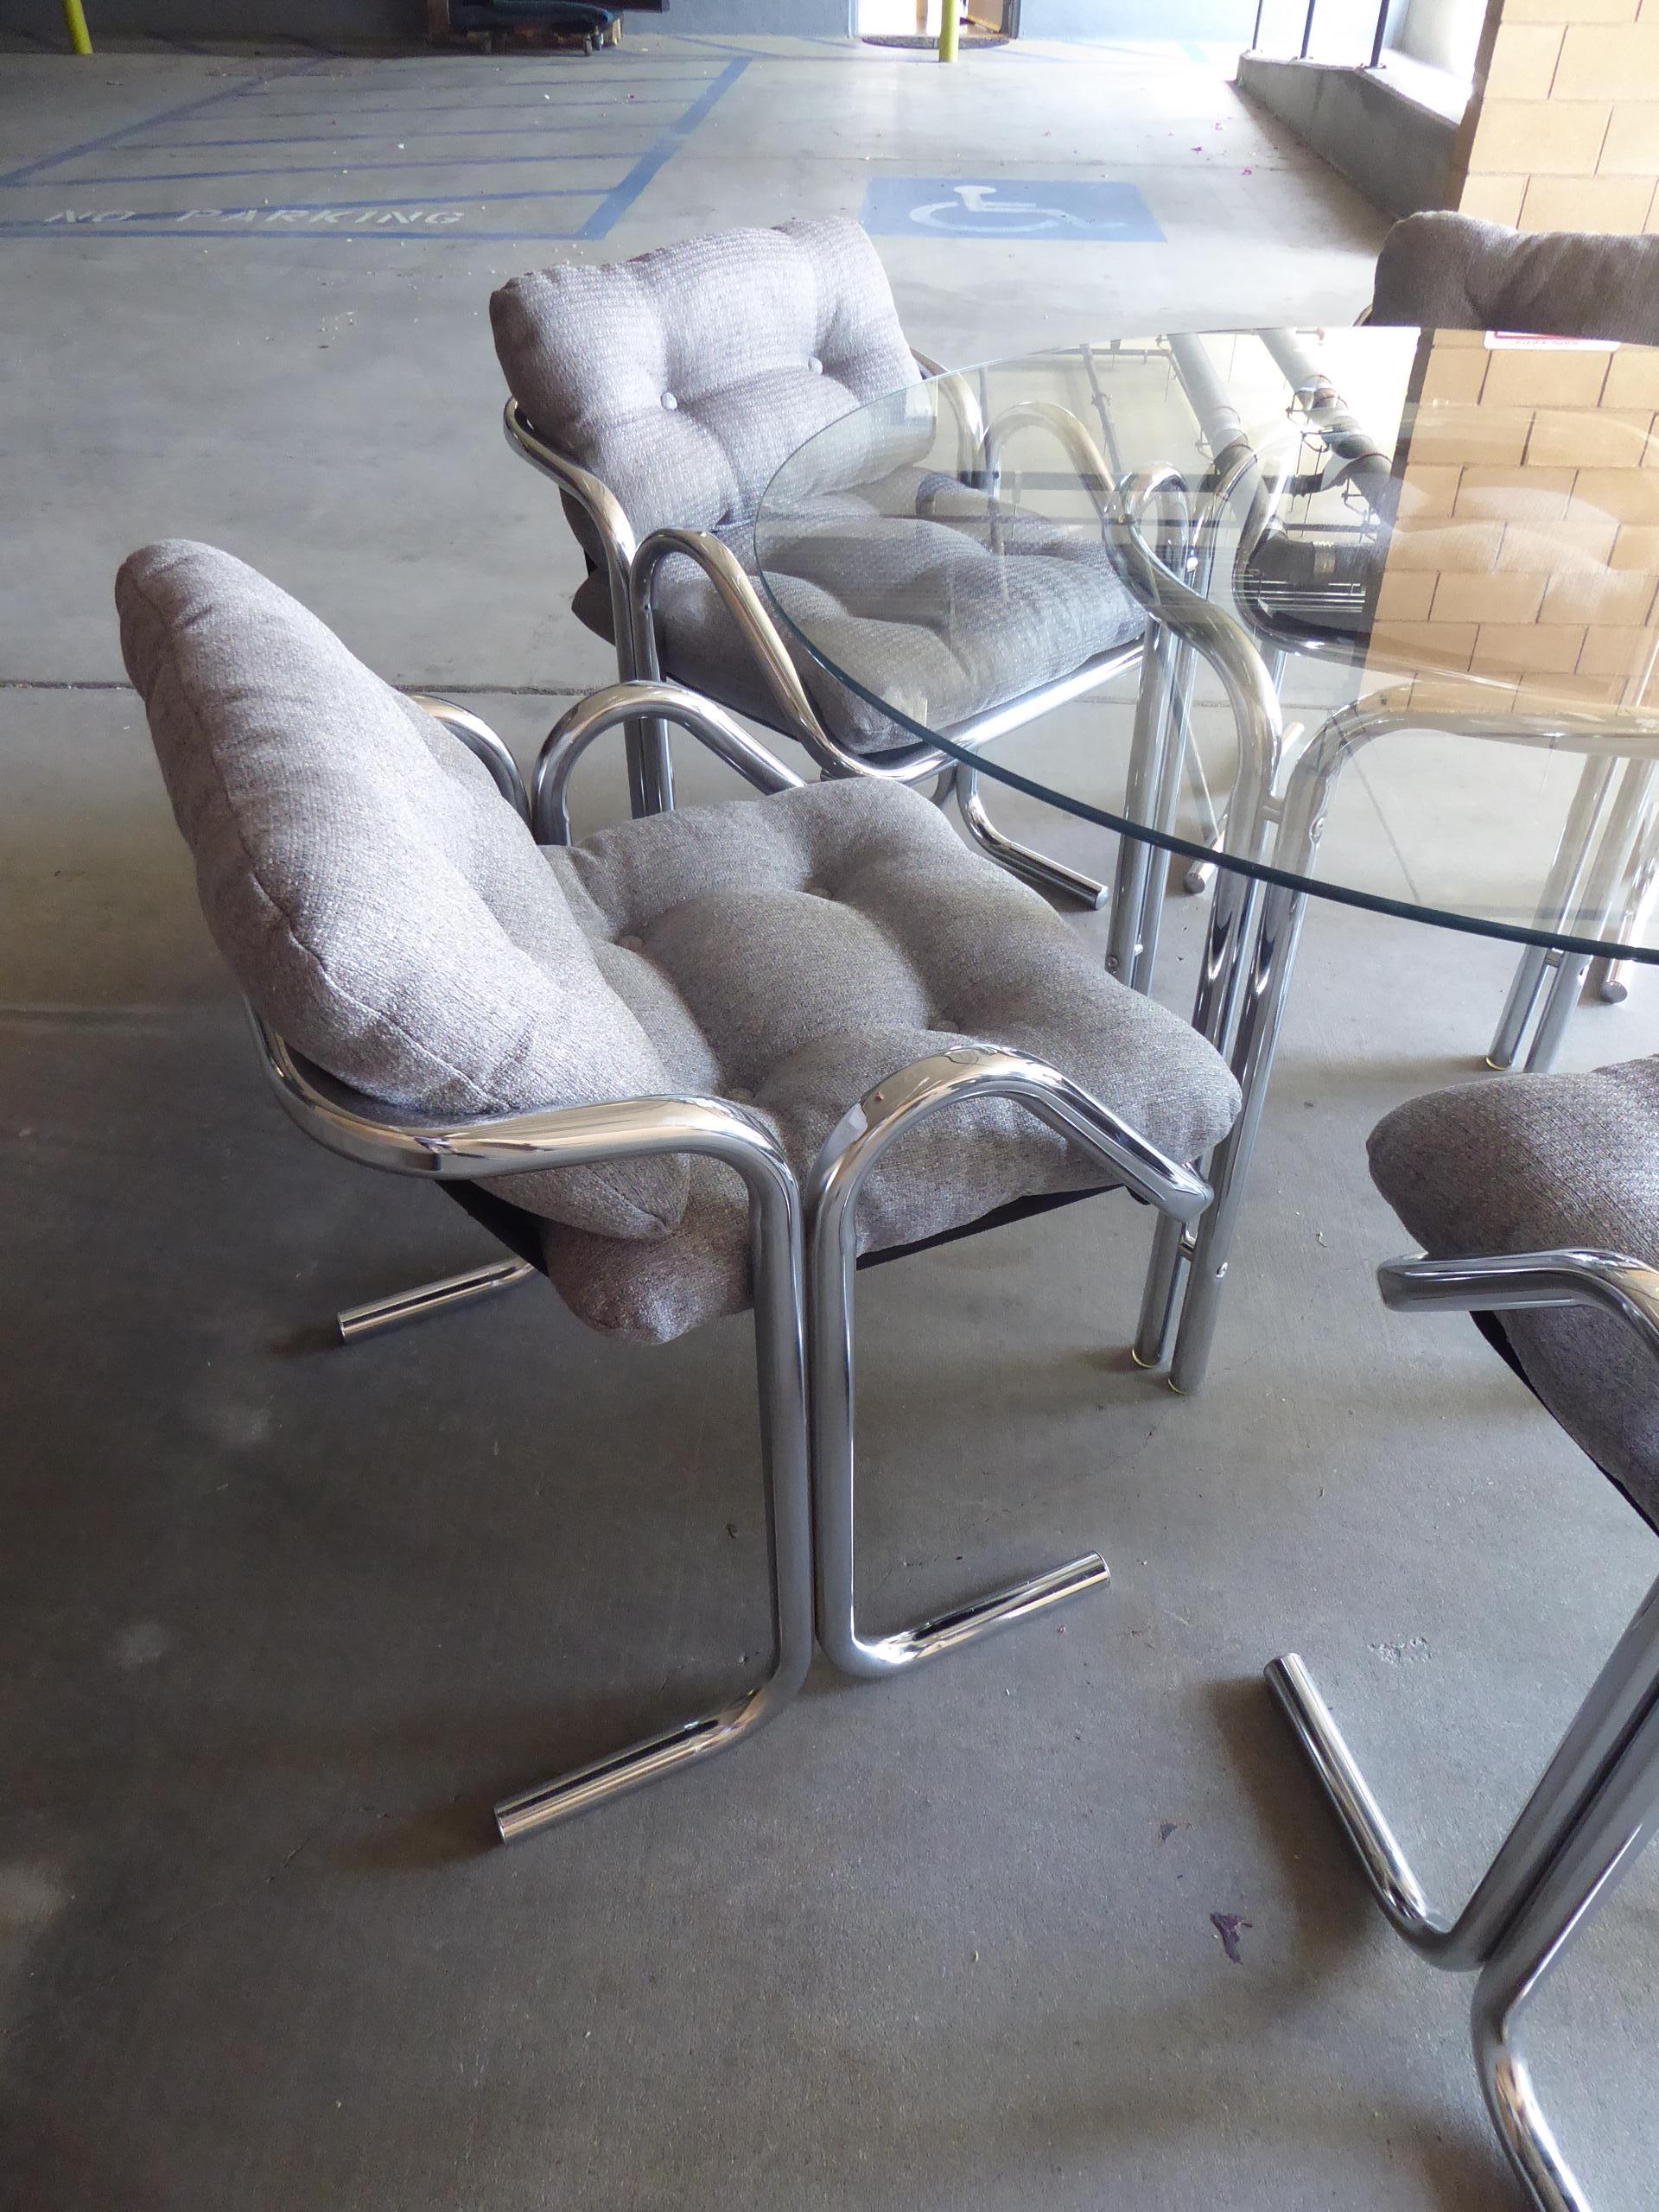 Chrome-Plated Tubular Steel Dining Set Designed by Jerry Johnson, circa 1970s For Sale 3